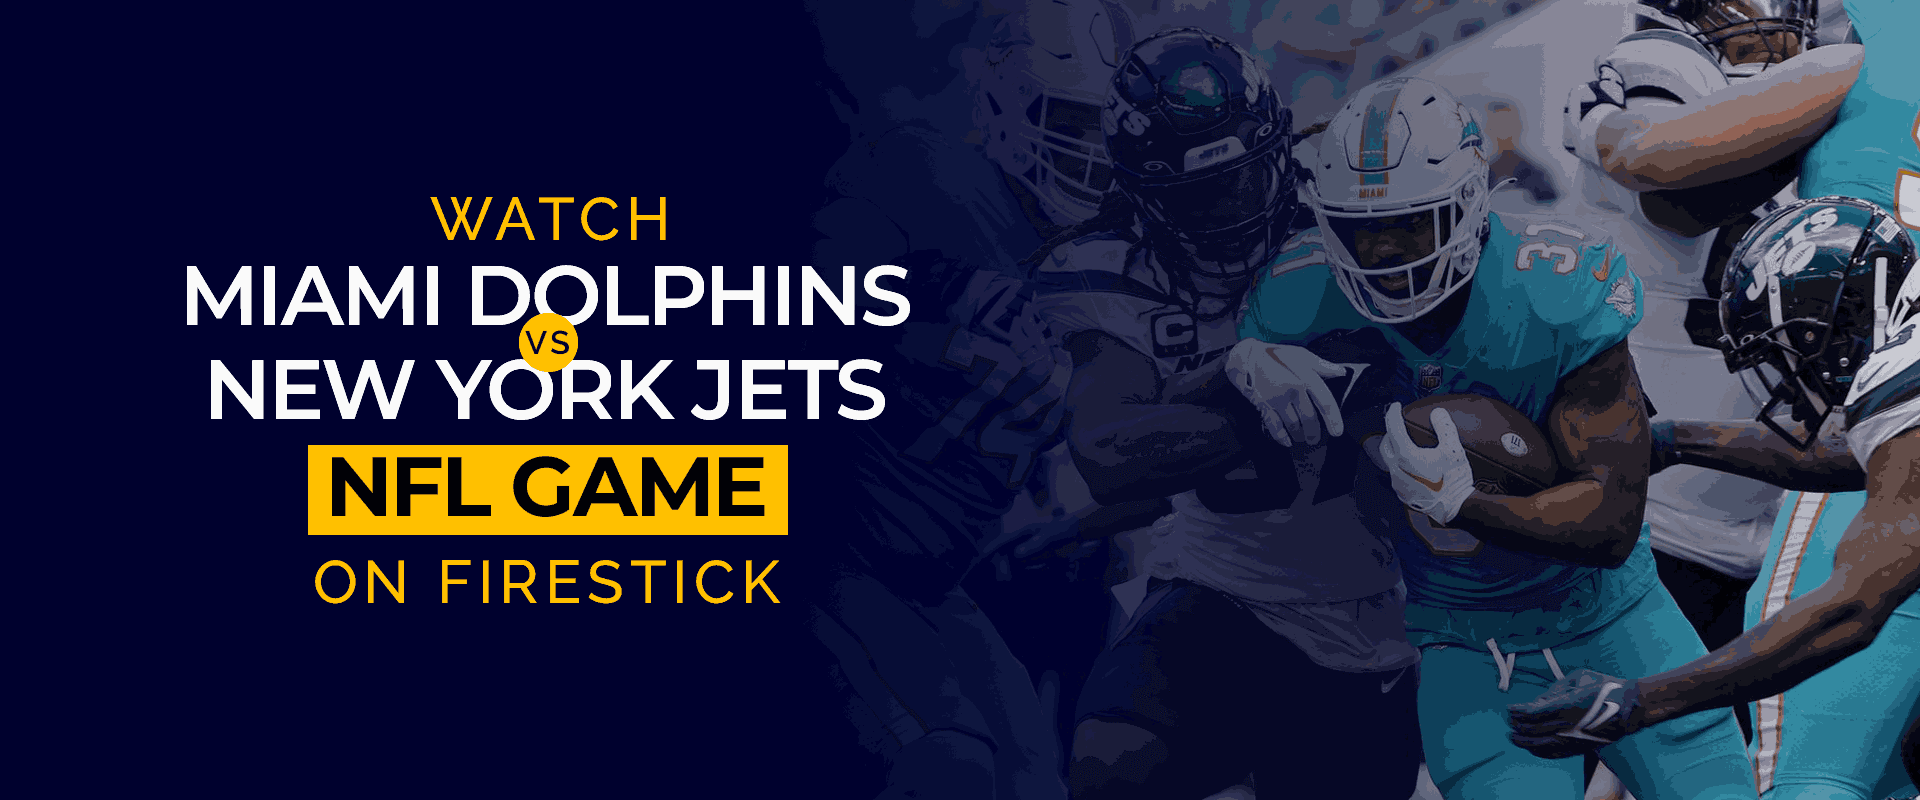 Watch NFL Miami Dolphins Vs New York Jets Game Live On Firestick